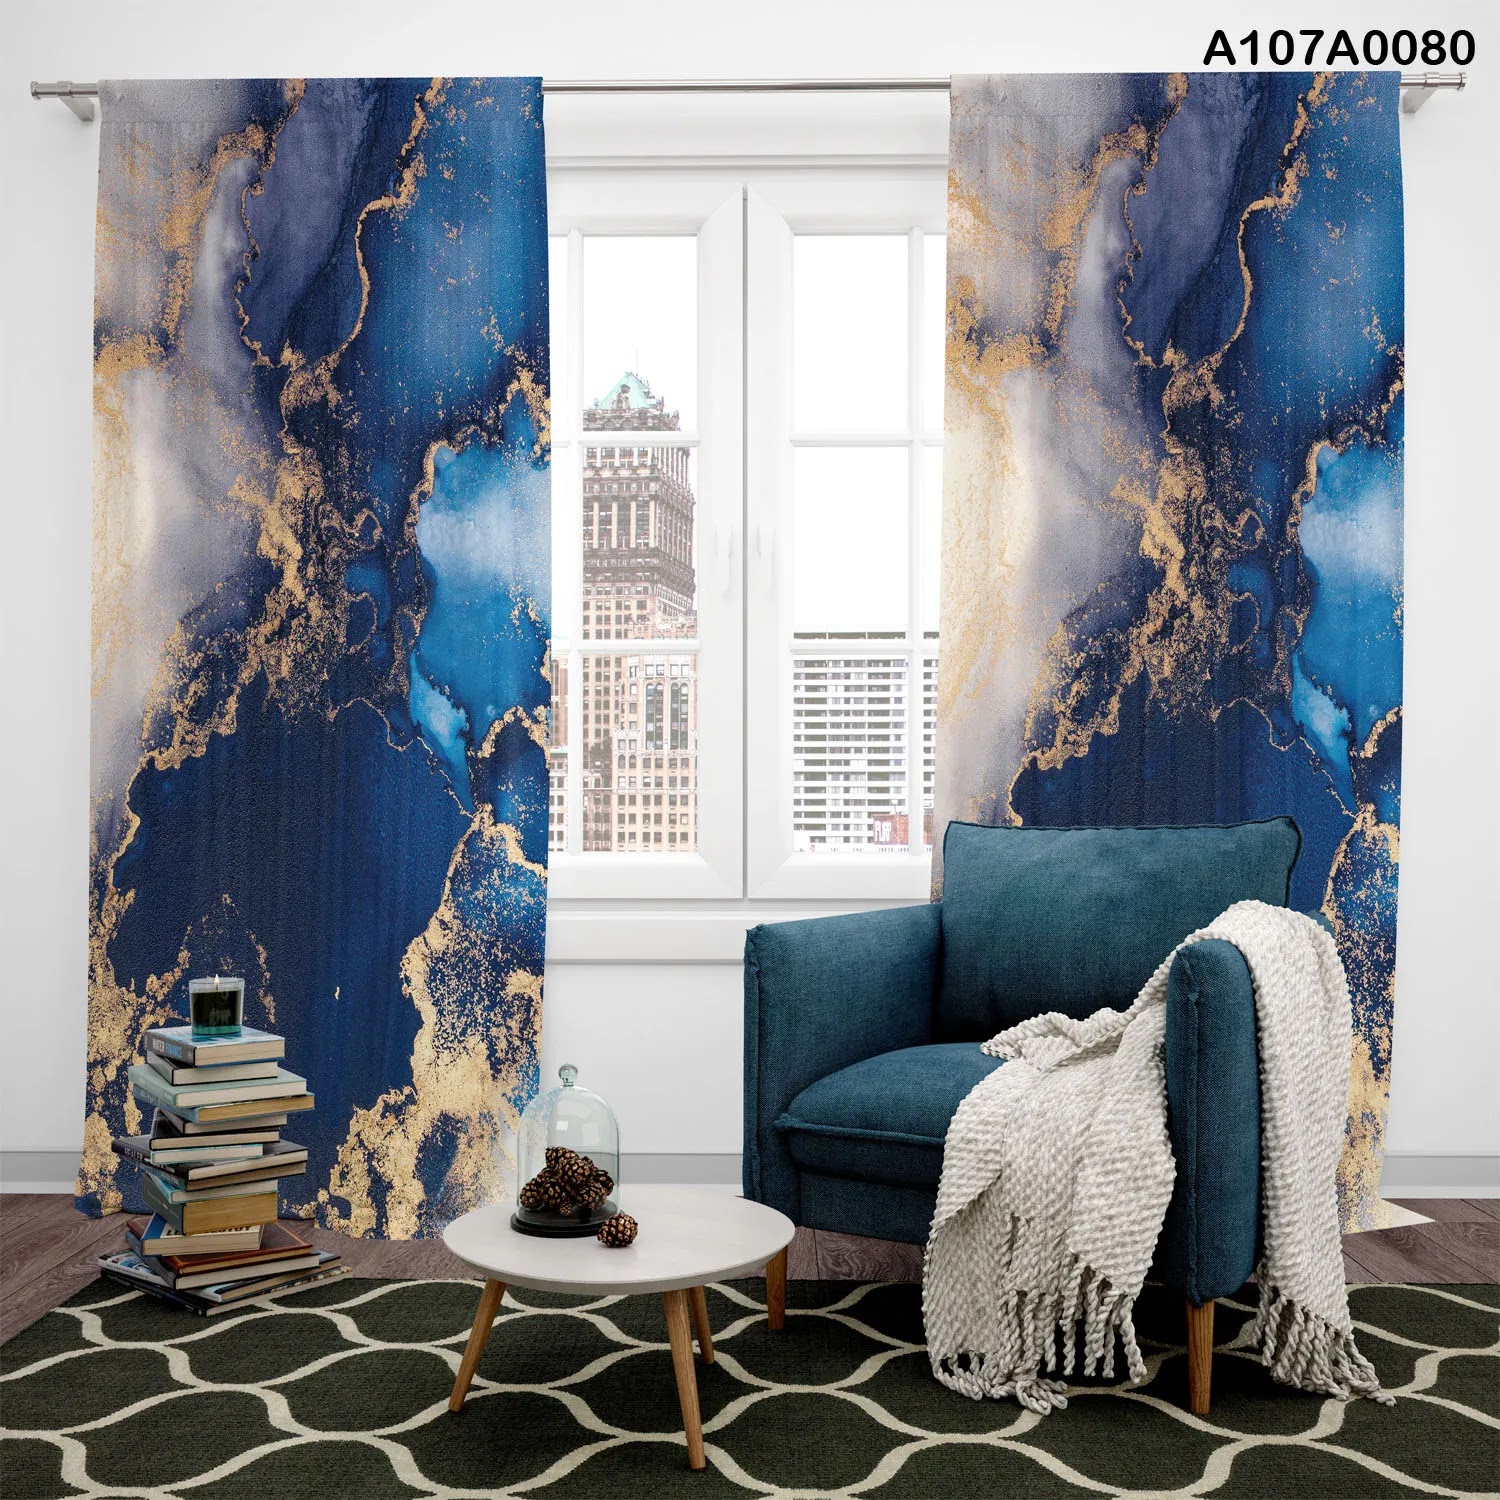 Curtains with color combination of blue and gold